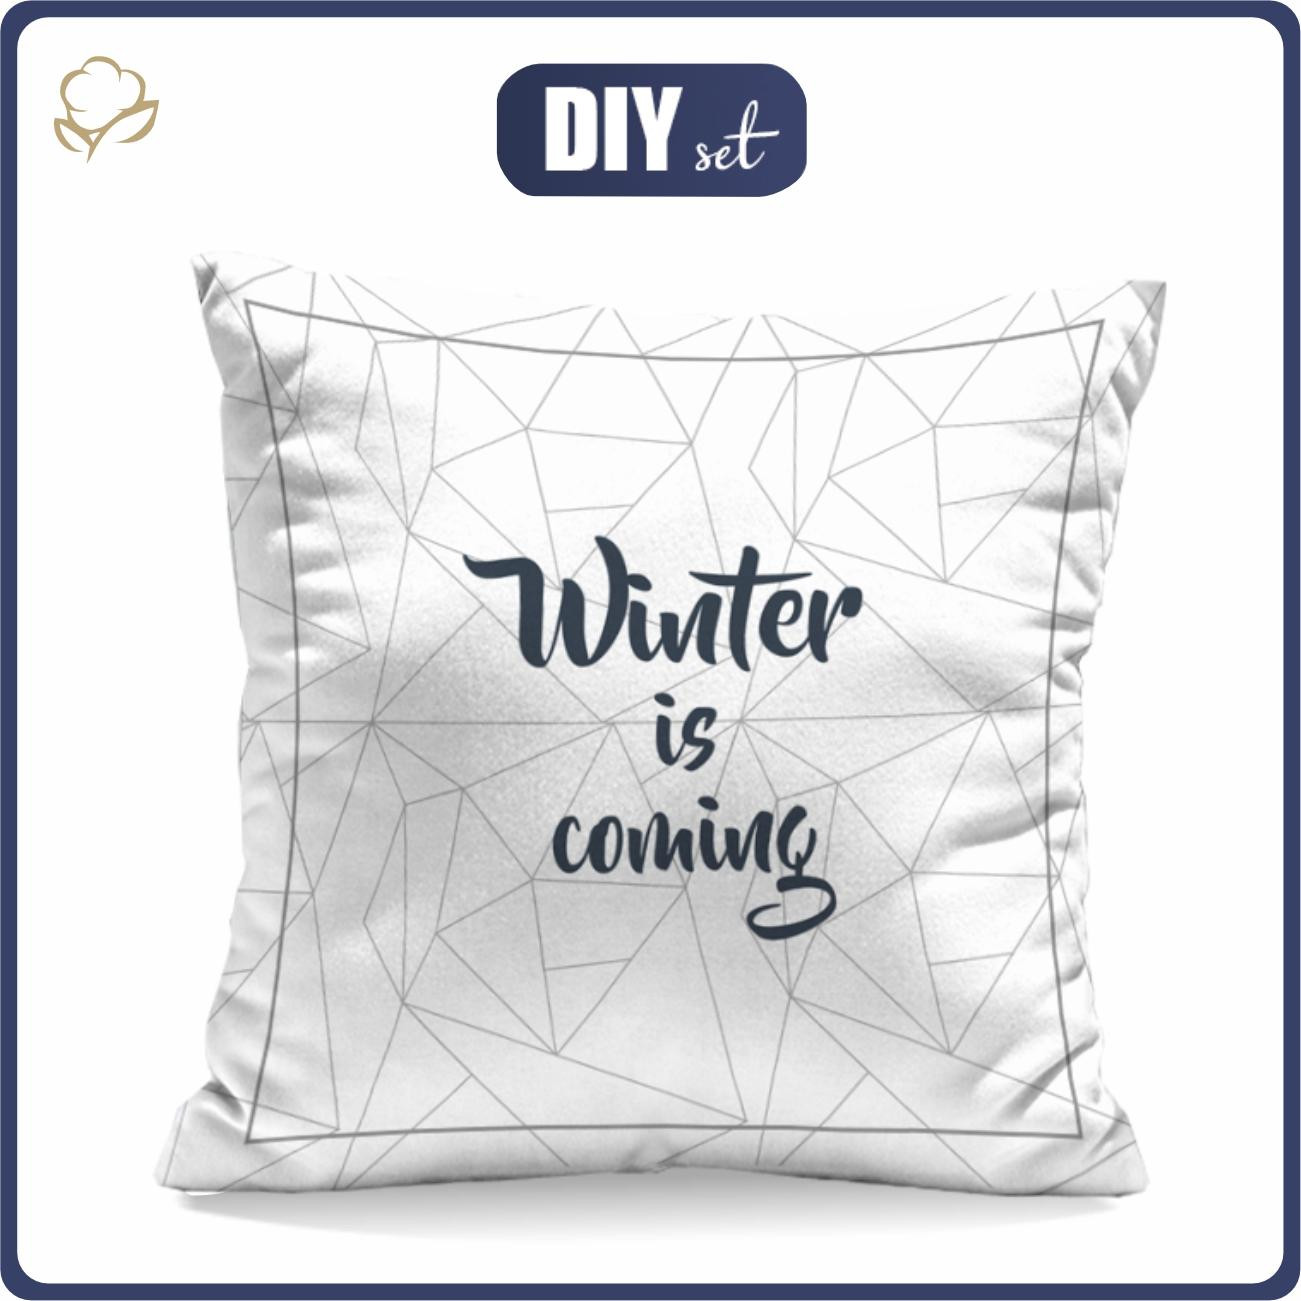 PILLOW 45x45 - WINTER IS COMING - Panama 220g - sewing set